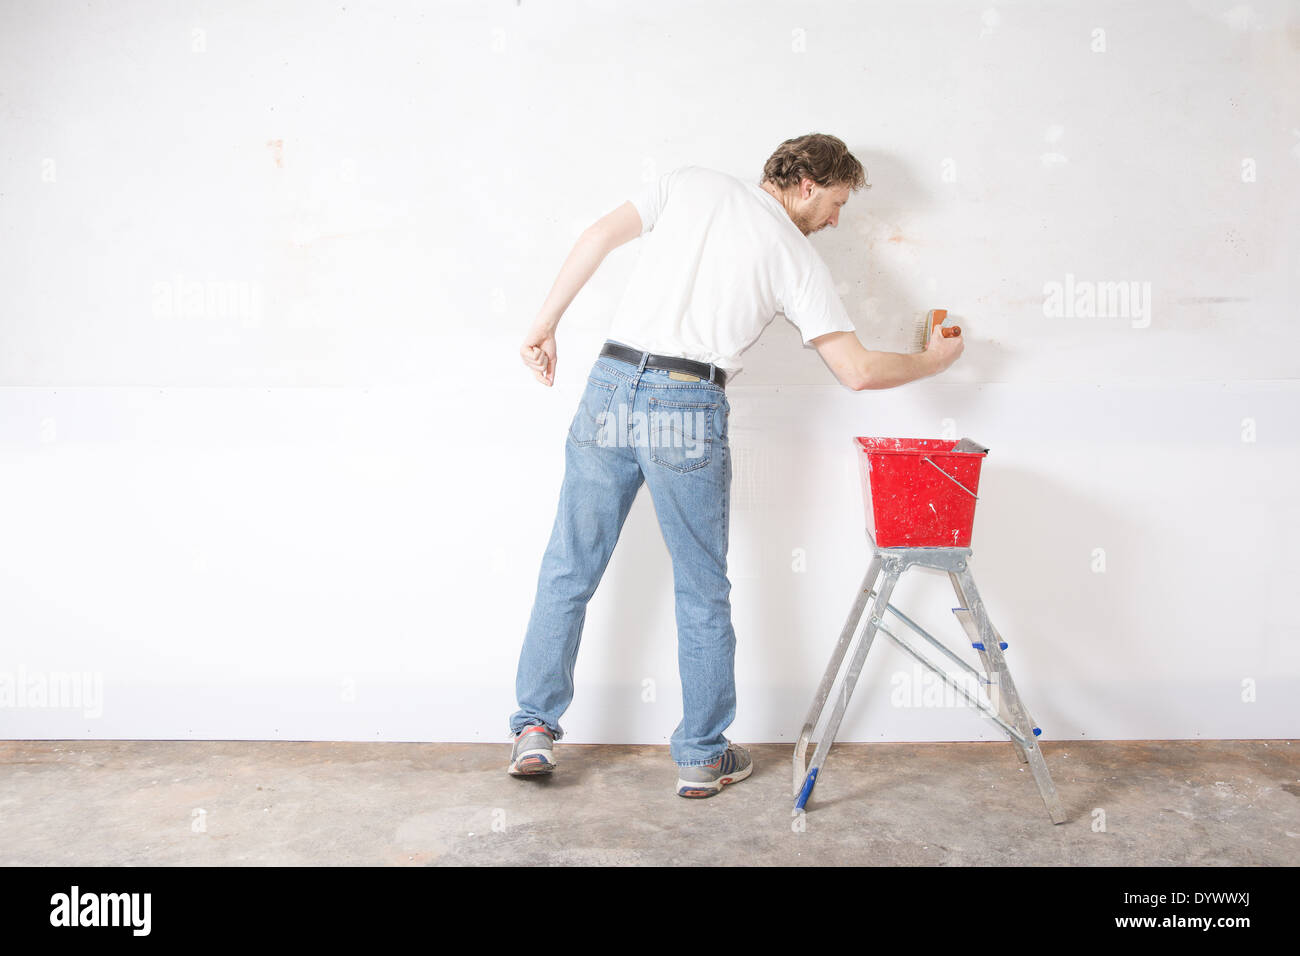 man painting a wall white with paint brush Stock Photo